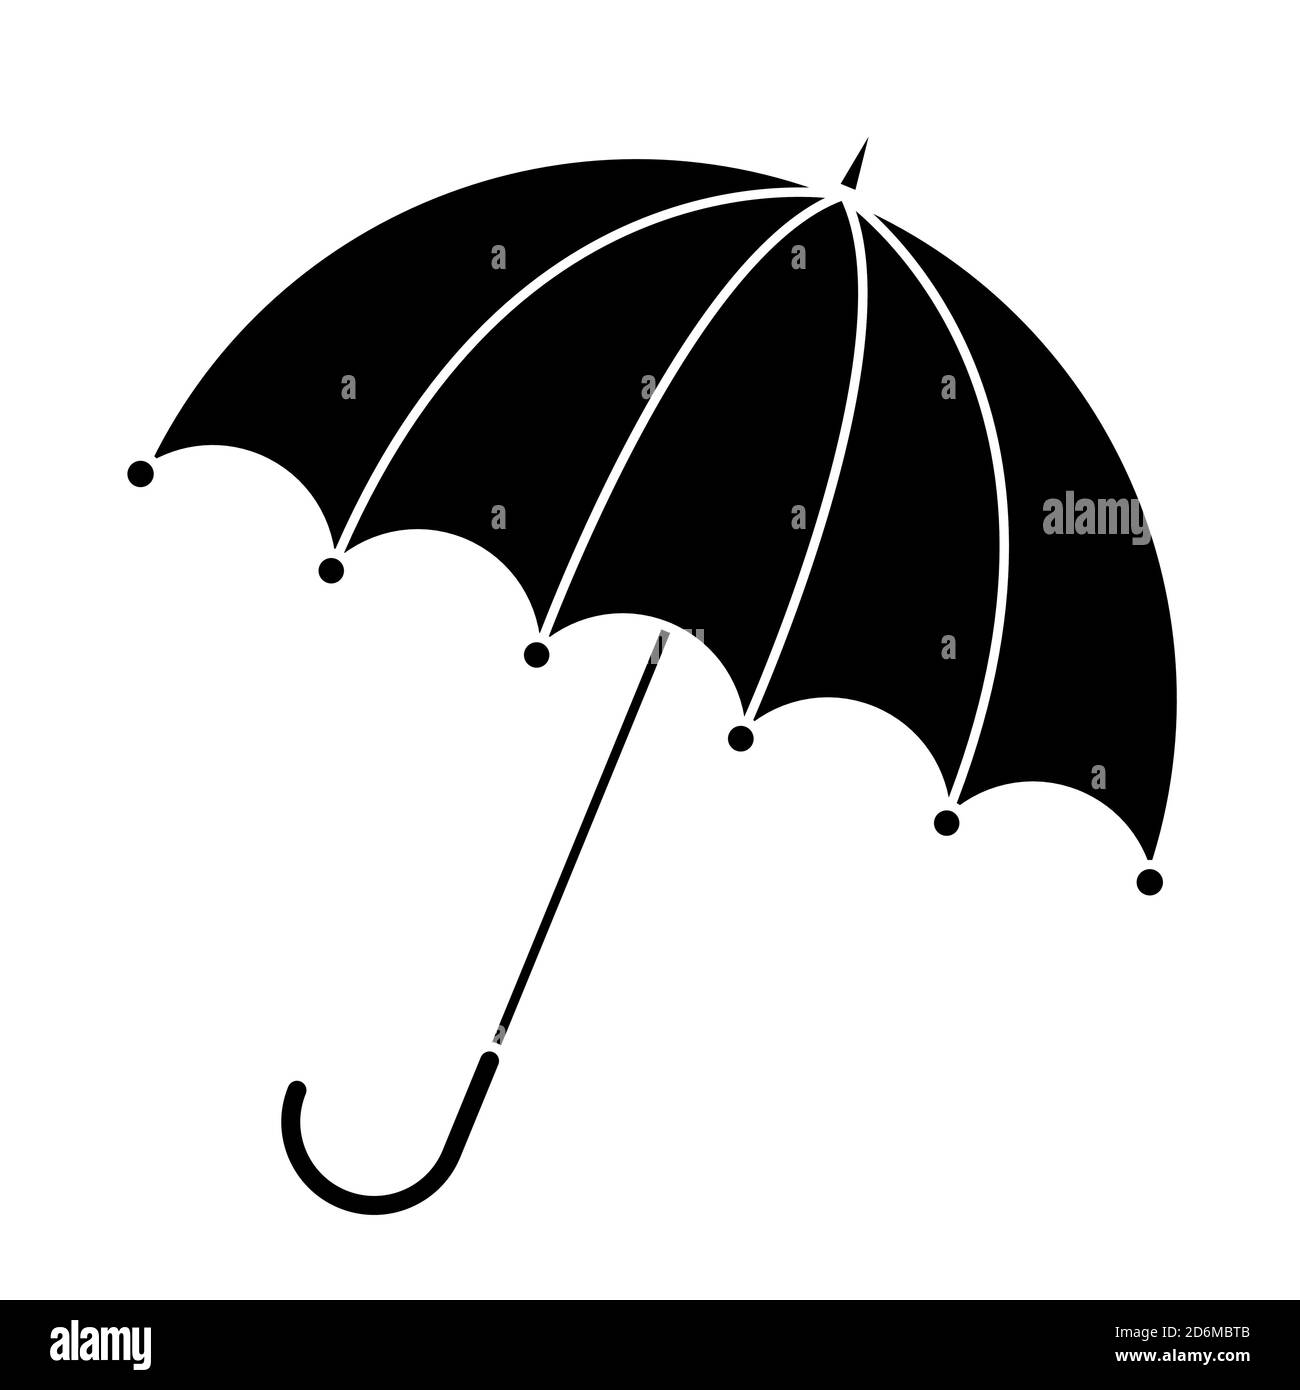 Umbrella silhouette isolated on white. Black and white open parasol icon. Illustration of rain protection autumn graphic element. Autumnal vector symb Stock Vector